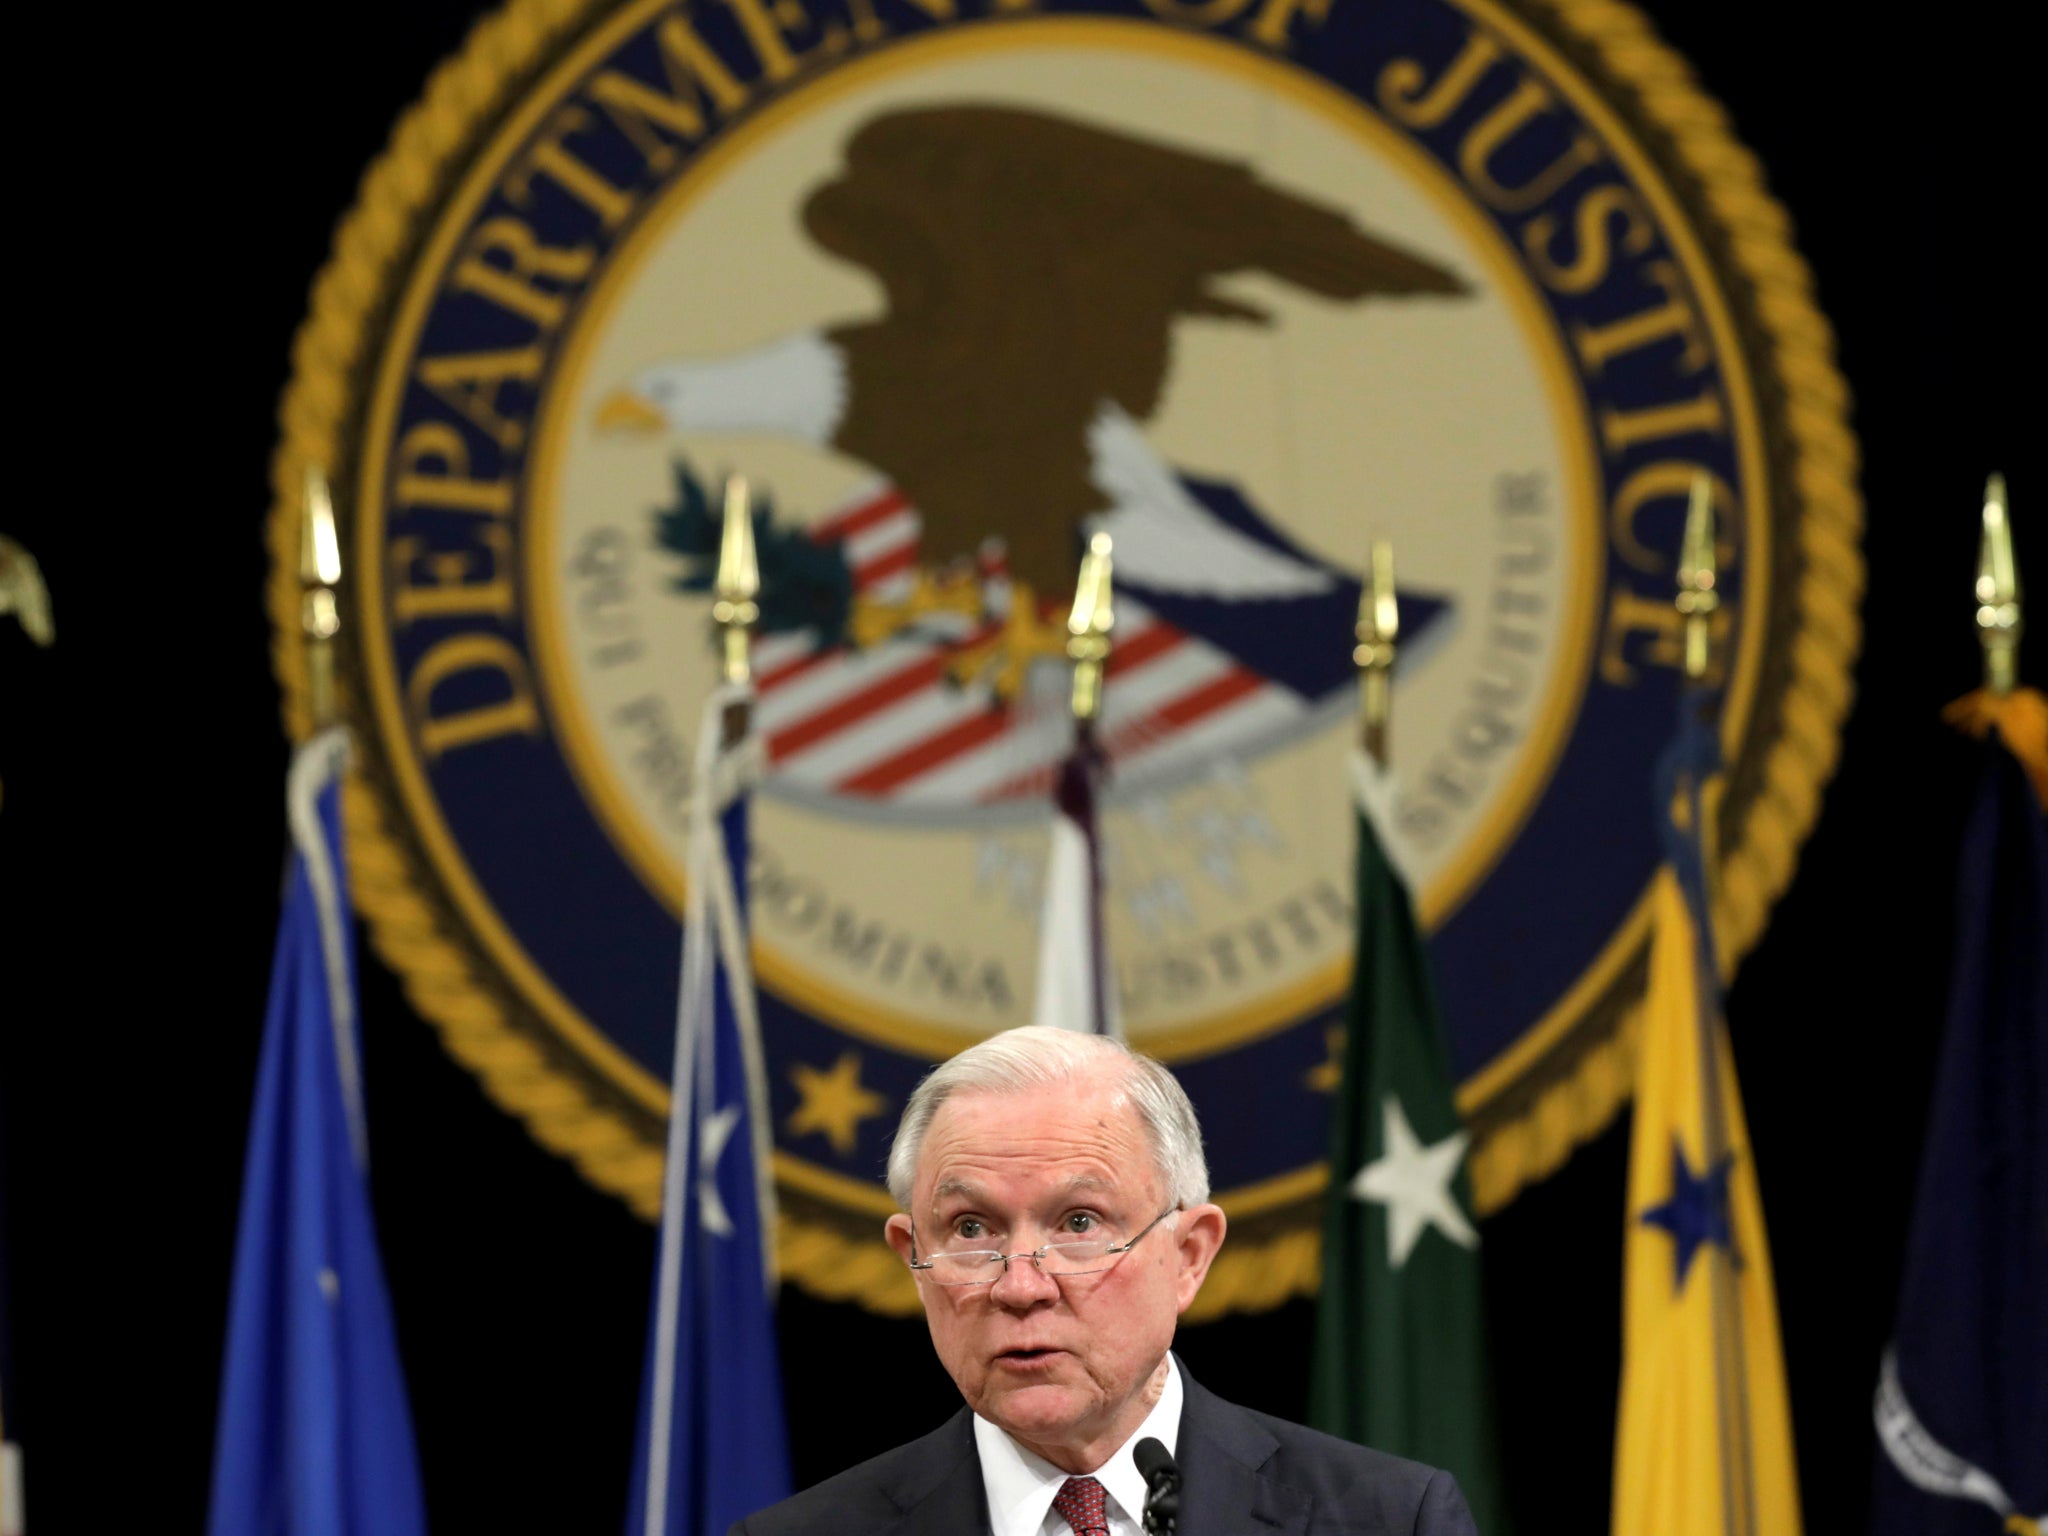 Attorney General Jeff Sessions and the US Department of Justice have seized phone and email records of New York Times' journalist Ali Watkins